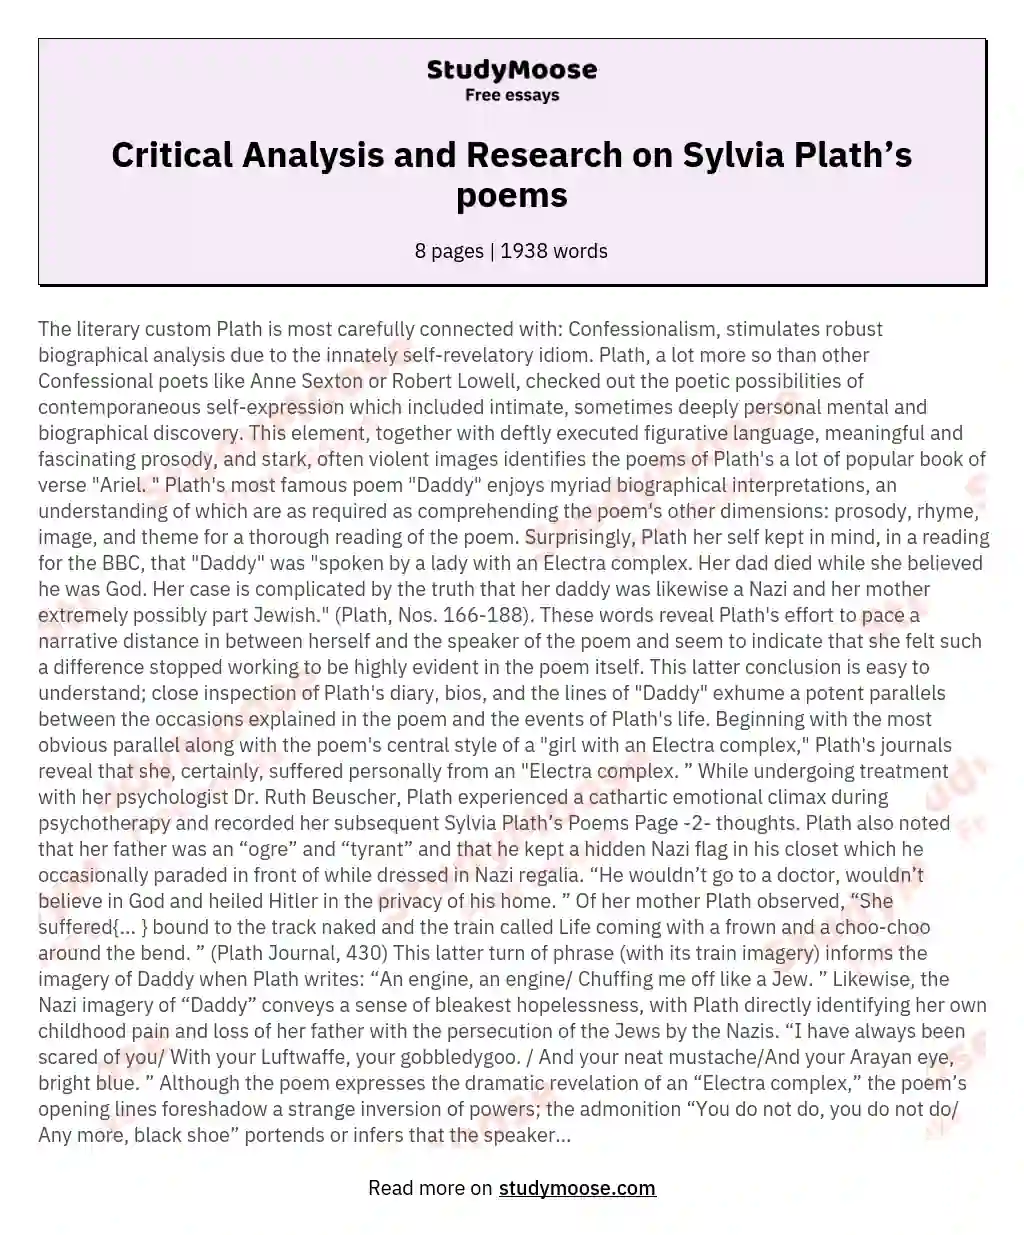 Critical Analysis and Research on Sylvia Plath’s poems